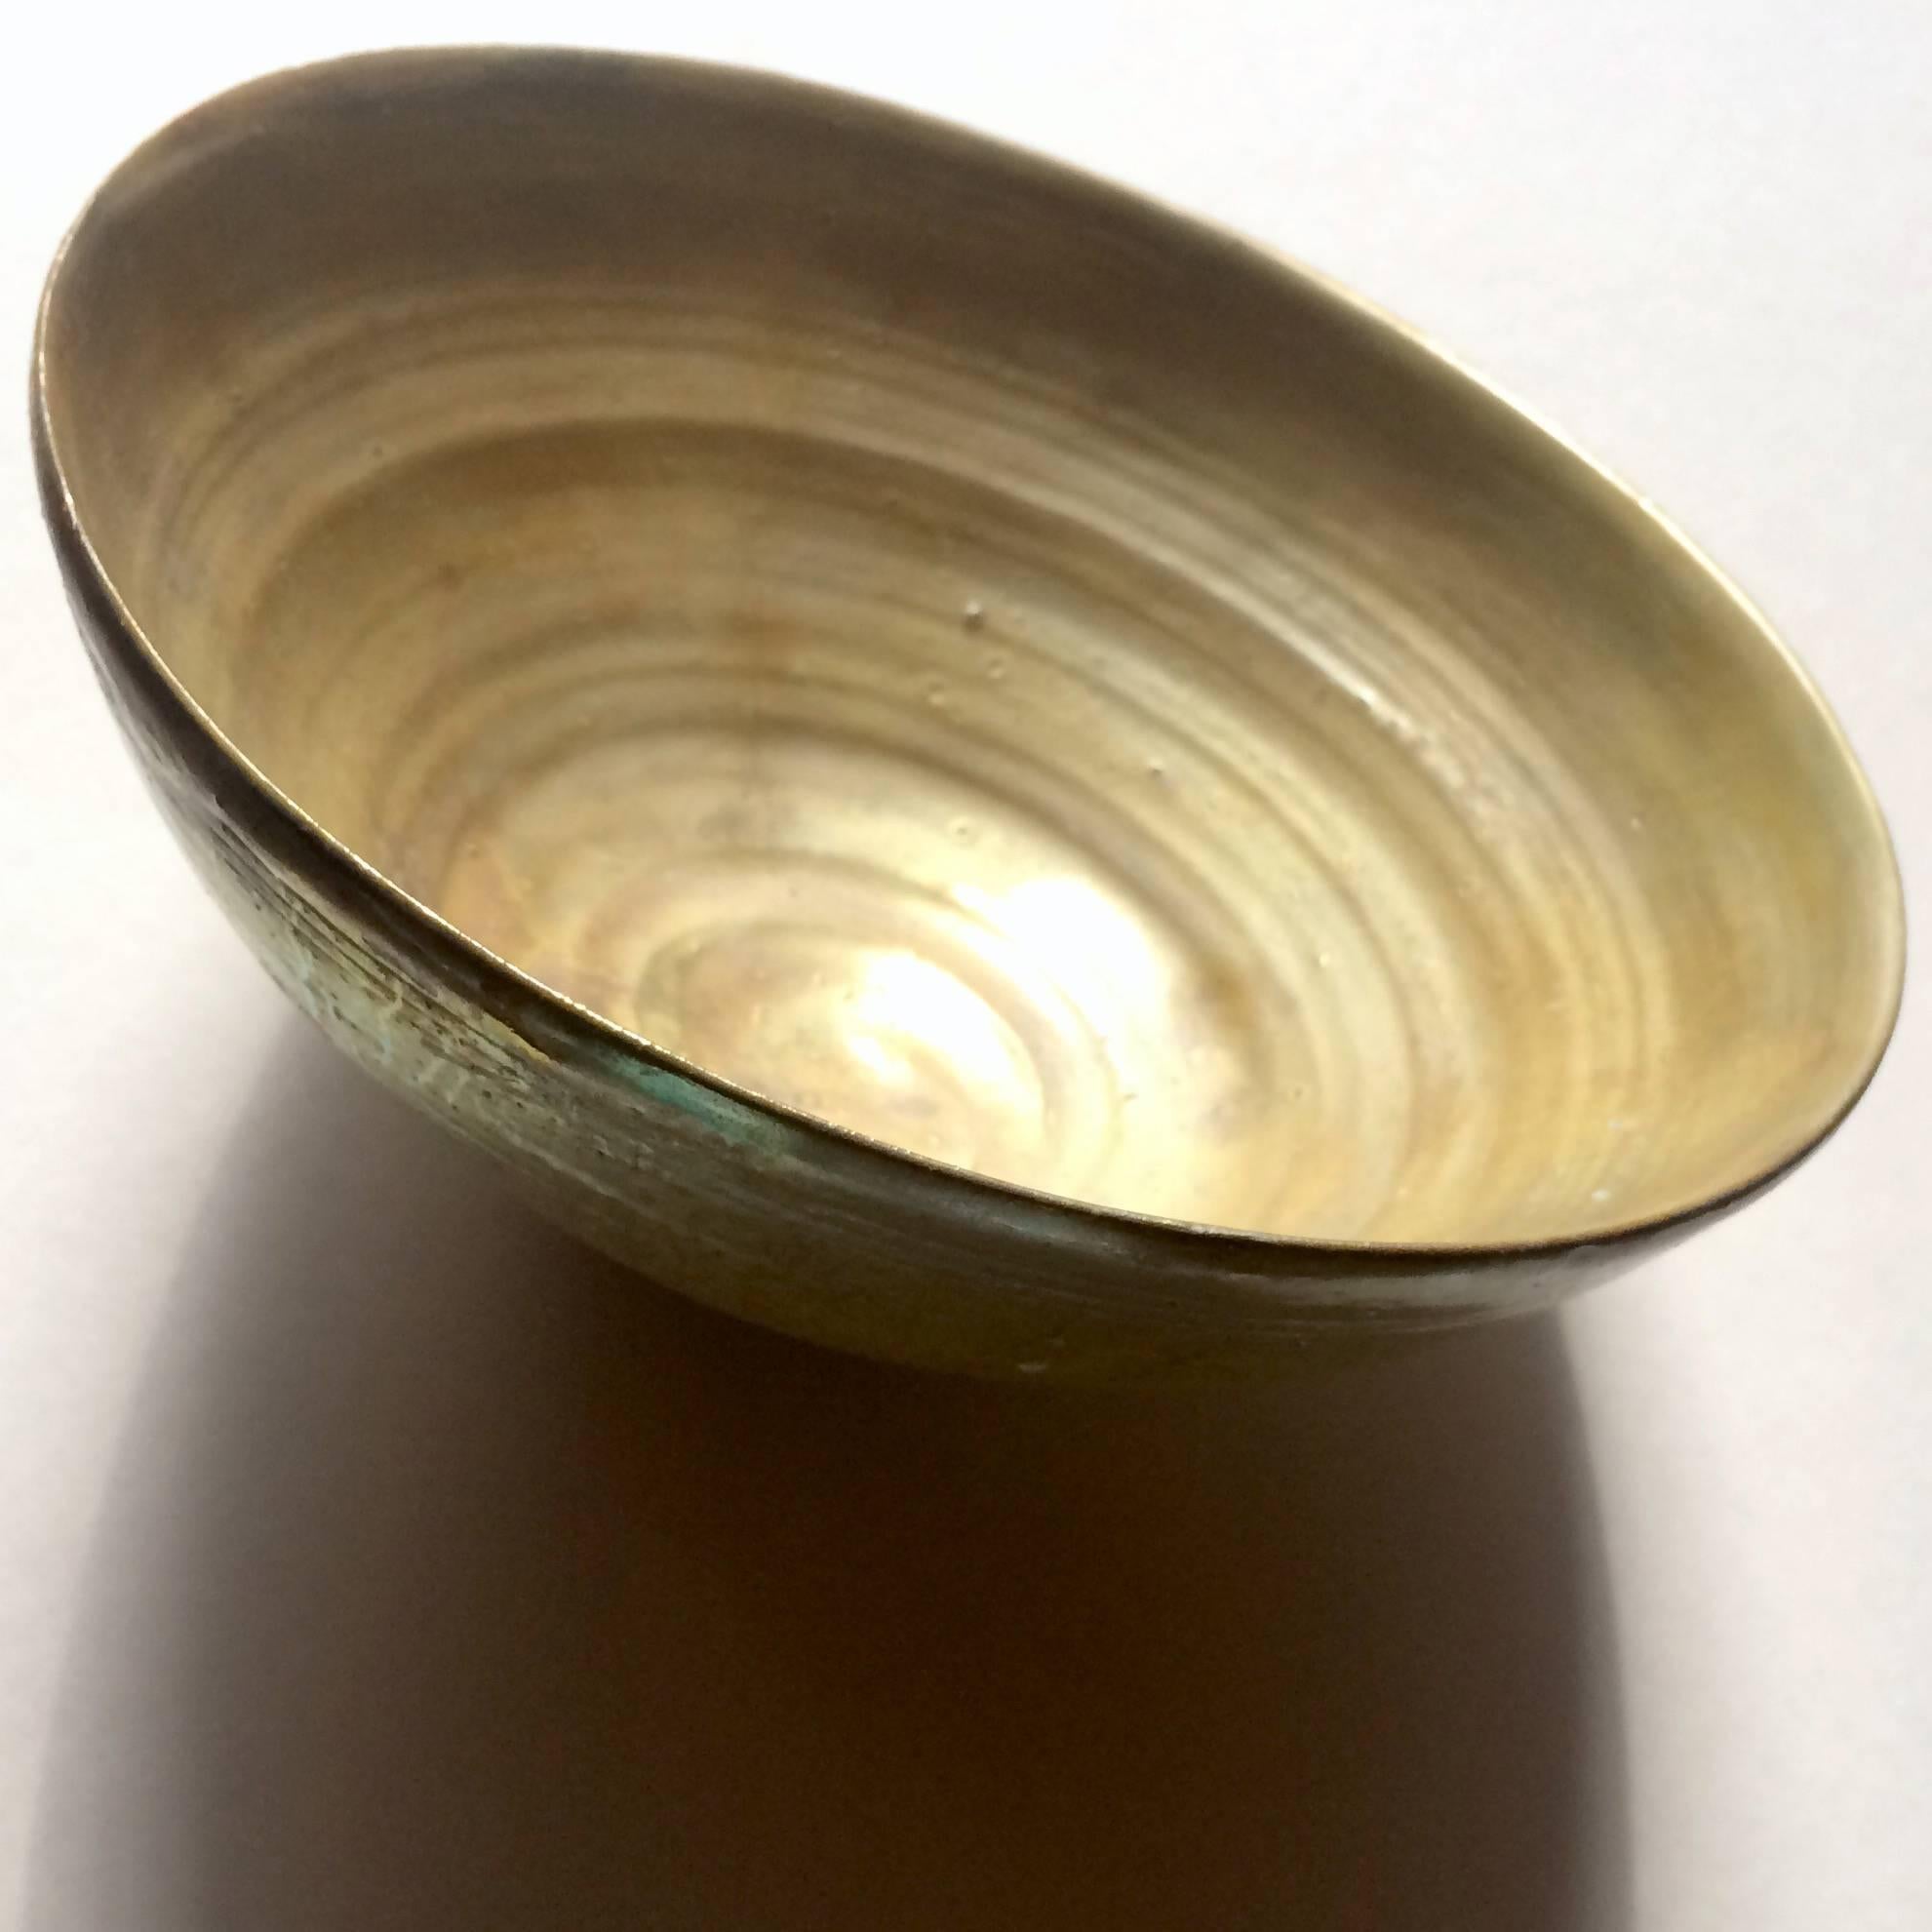 A striking example of Wood's famous lusterware, this iridescent gold bowl is a alluring contrast of primitive form and luxurious finish with beautiful variations in its shading and textures, accented by scattered drip lines and pooling. Dates to